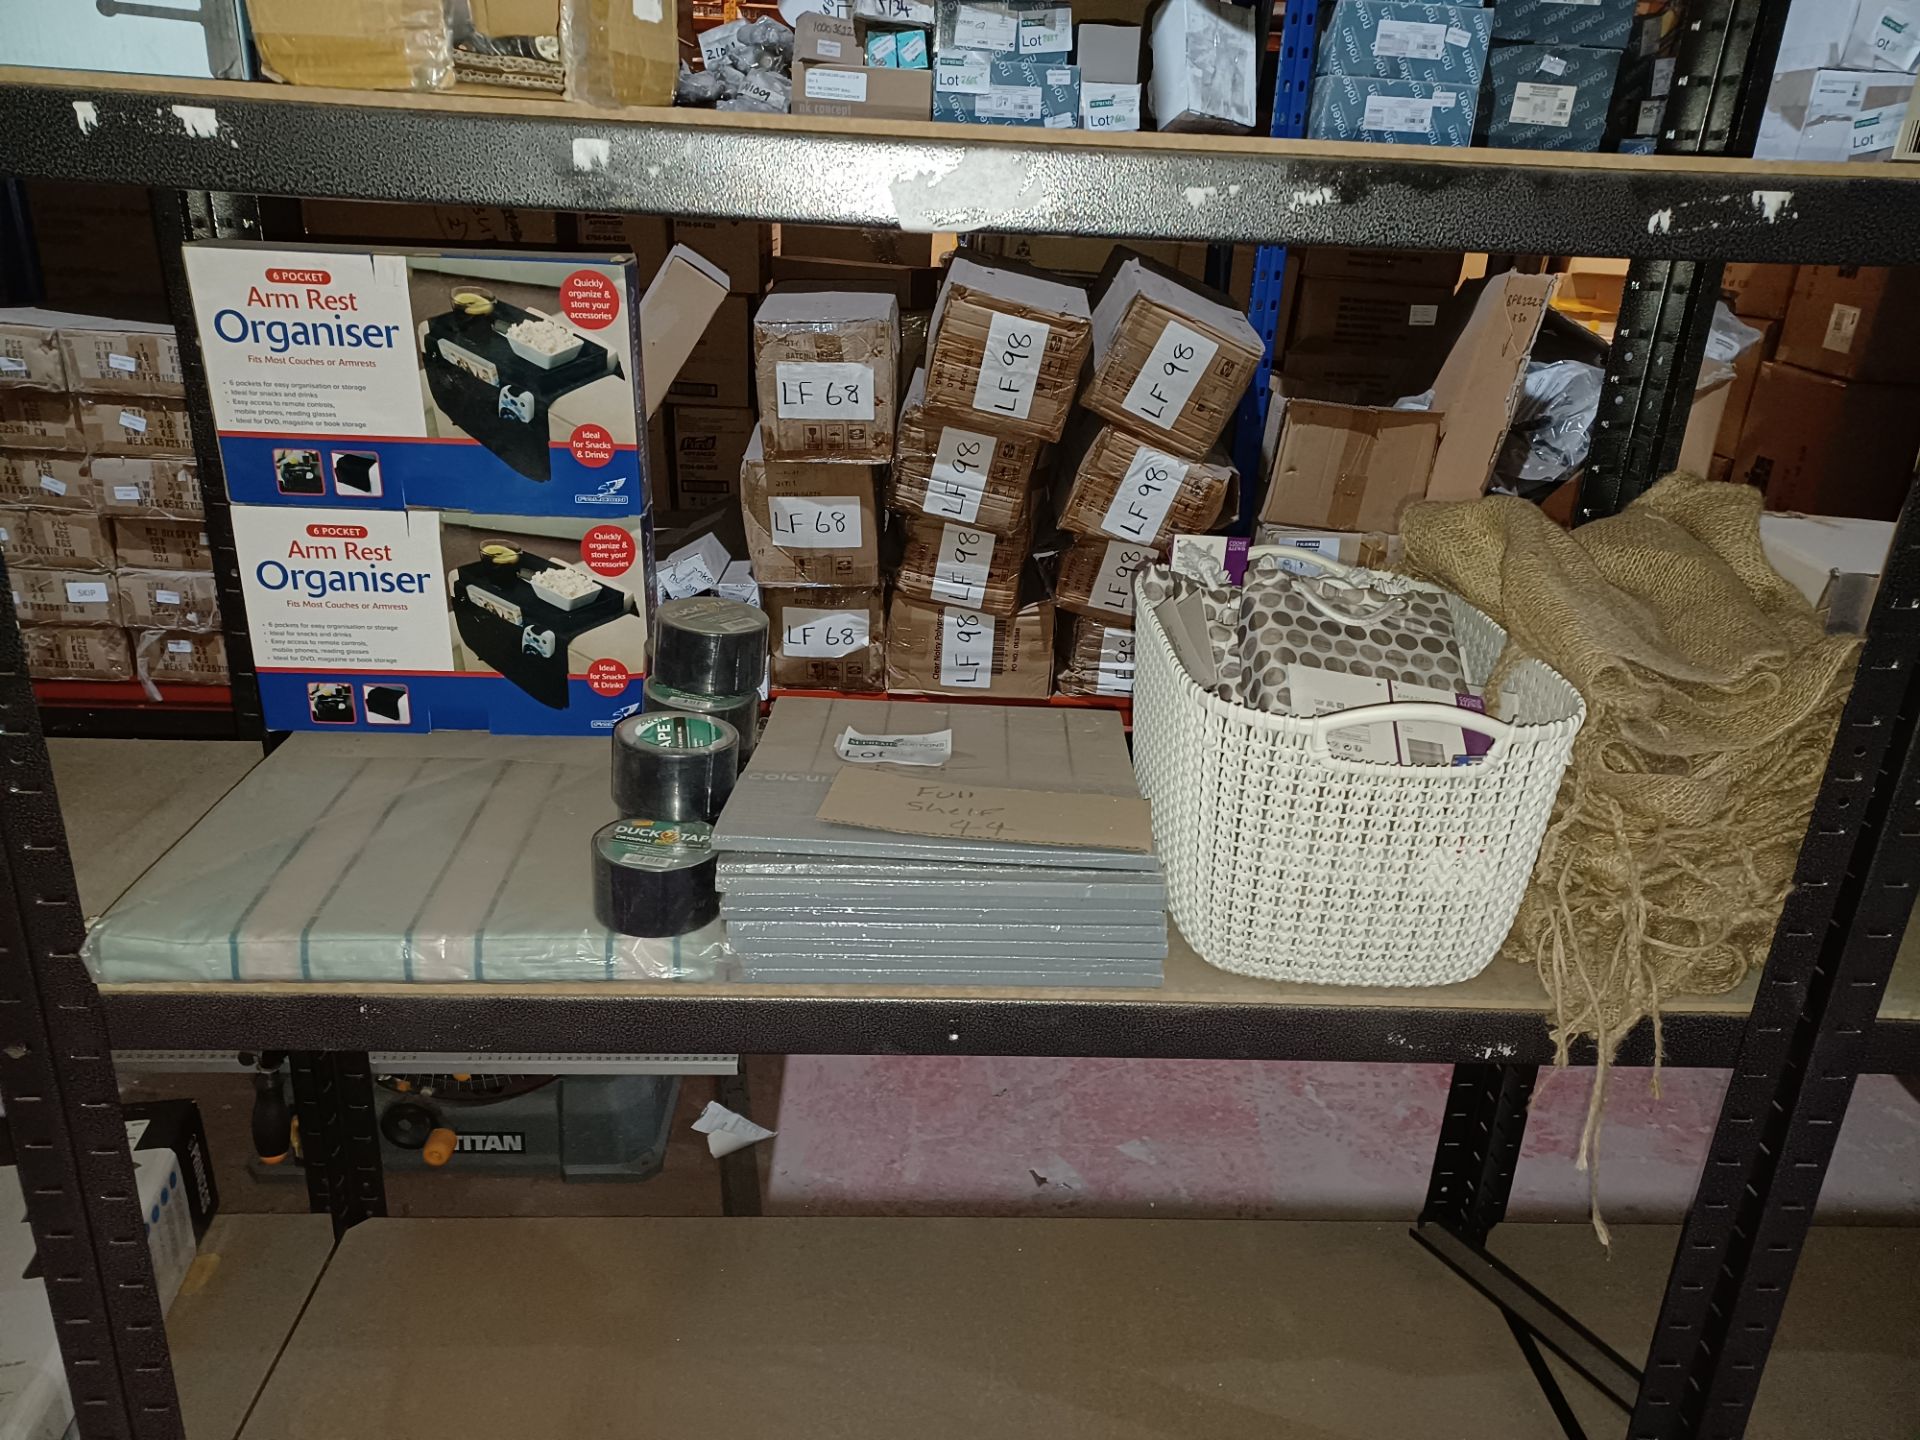 FULL SHELF CONTENTS TO ARM REST ORGANISER, DUCKTAPE, MOSAIC TILES AND MORE - PCK